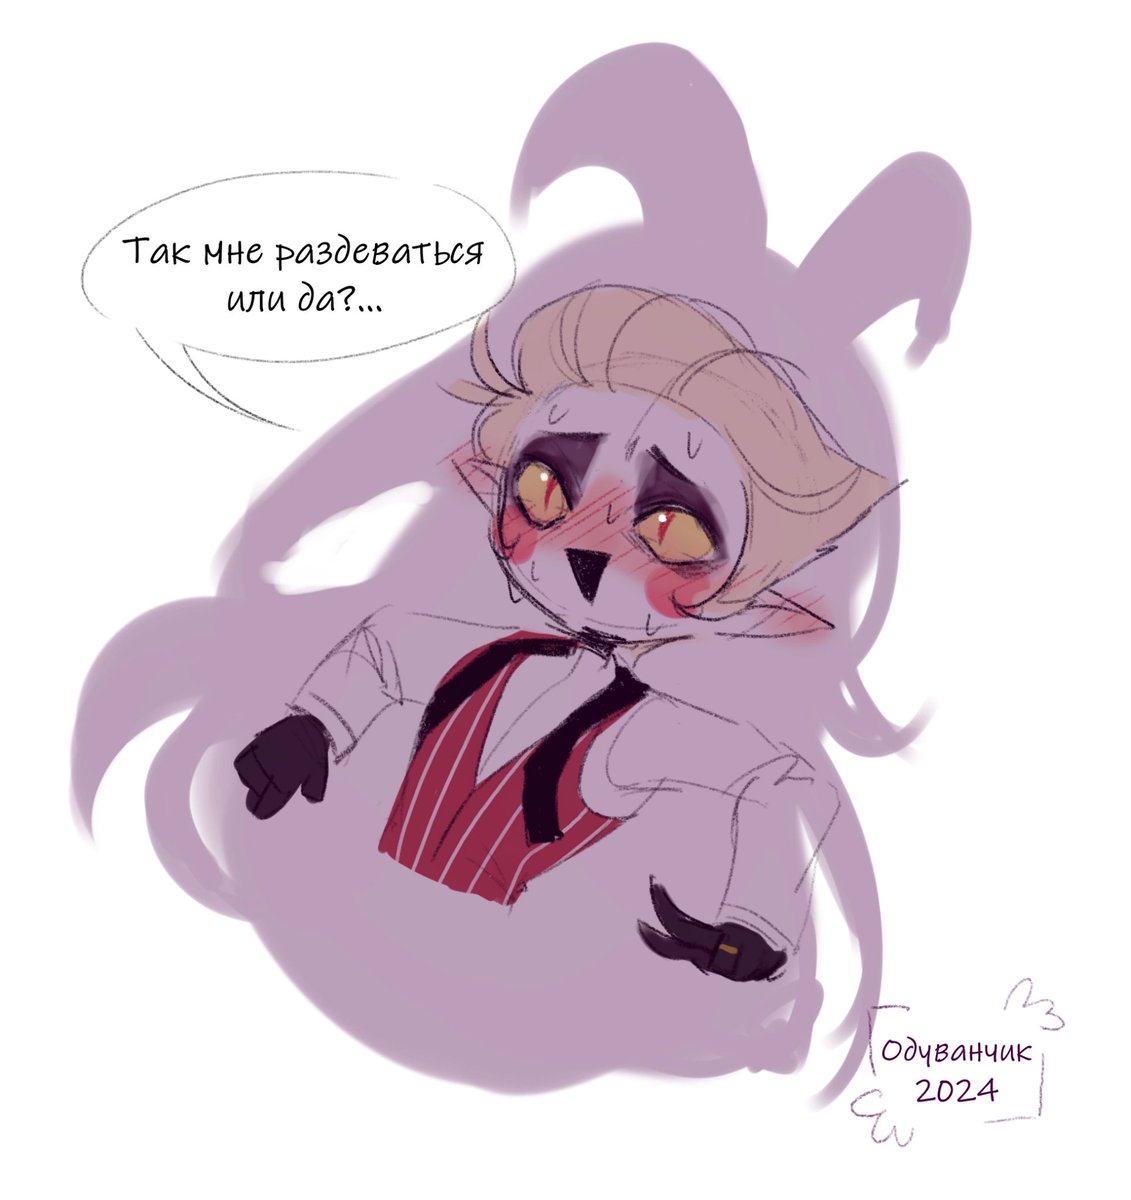 The picture was painted on April 6.
Lucifer: So should I take off my clothes or yes?😳
#HazbinHotel #HazbinHotelLucifer #HazbinHotelLilith #Lucilith